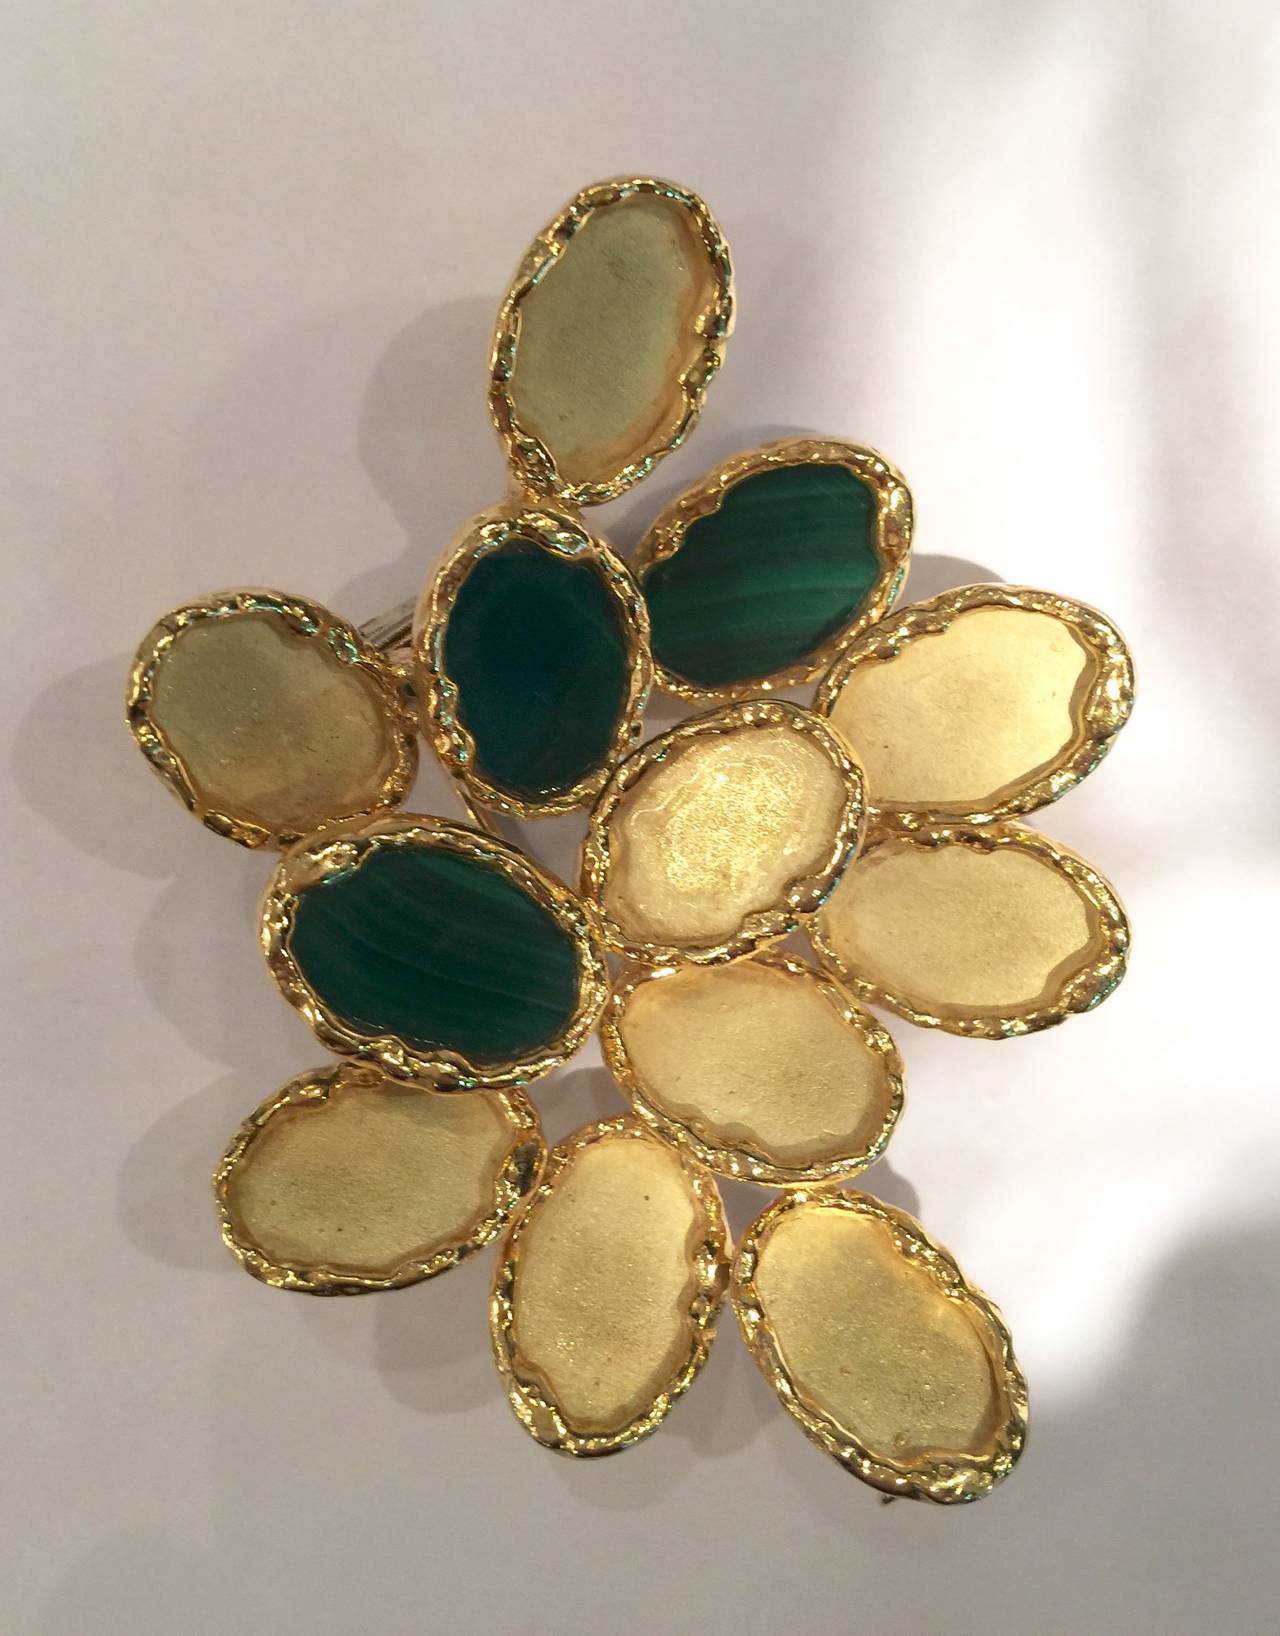 Yellow textured gold 1970's Chaumet brooch, decorated with malachite.
Weight : 27,7 grams.